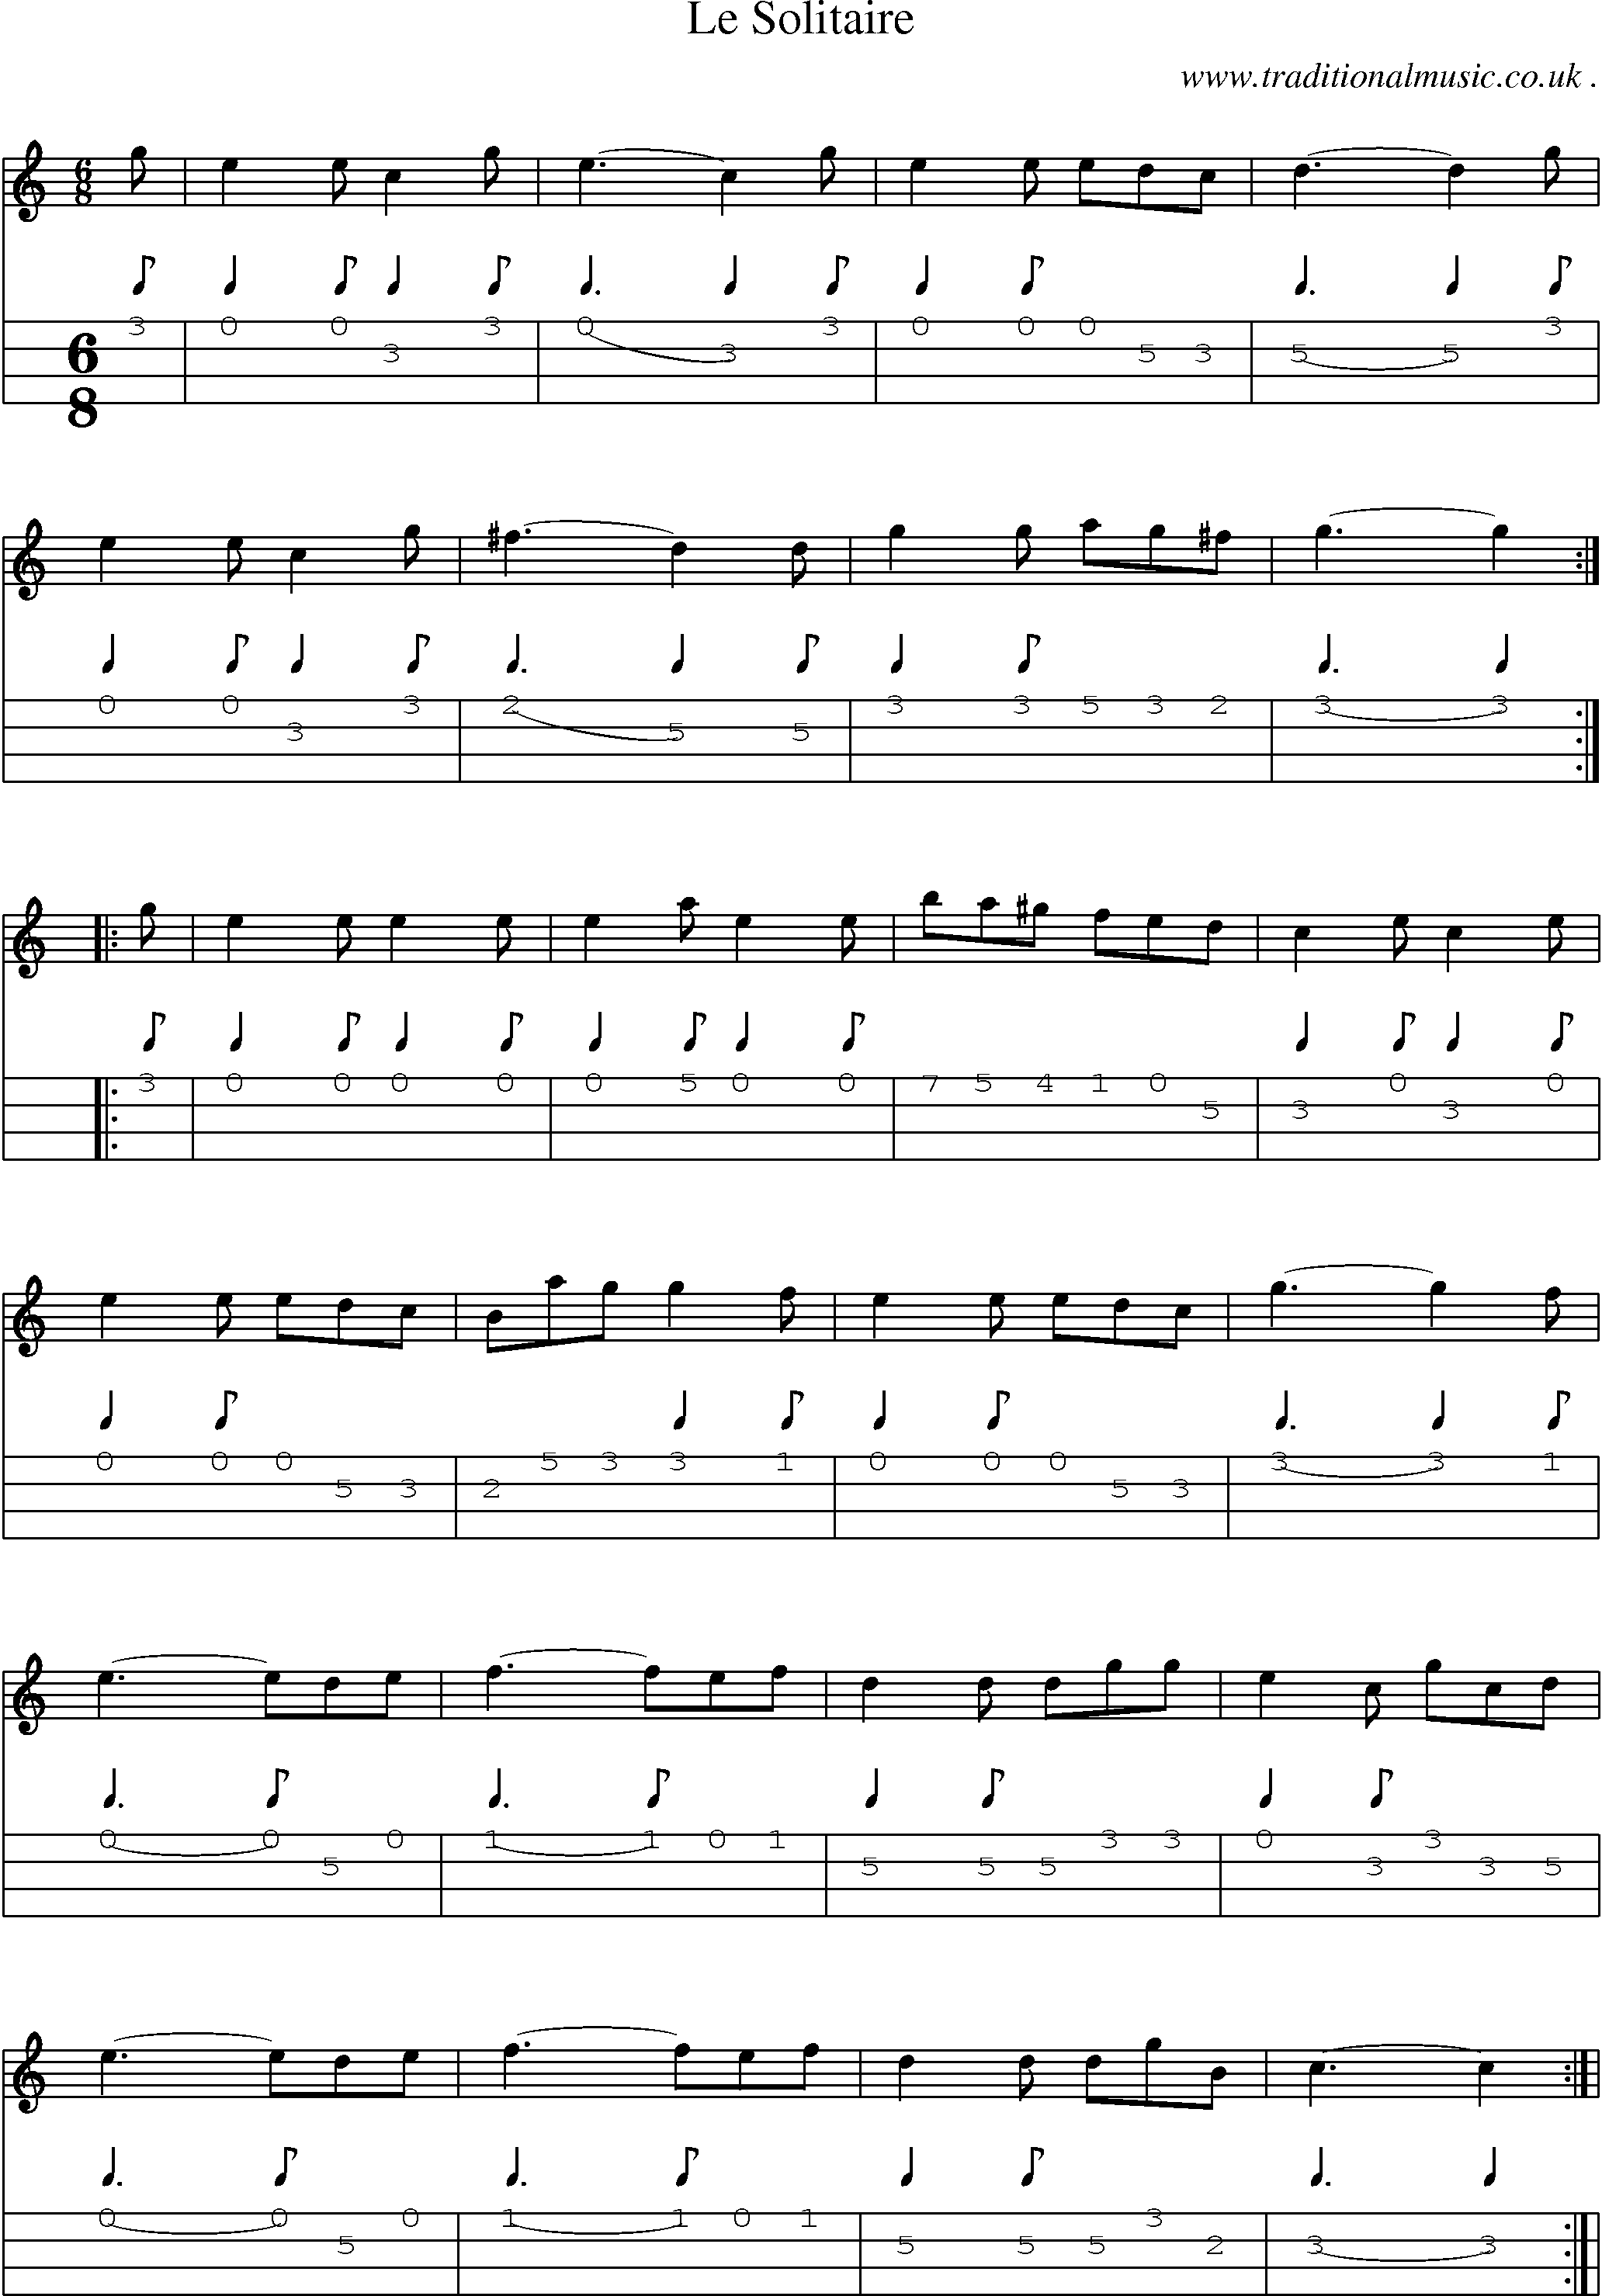 Sheet-Music and Mandolin Tabs for Le Solitaire